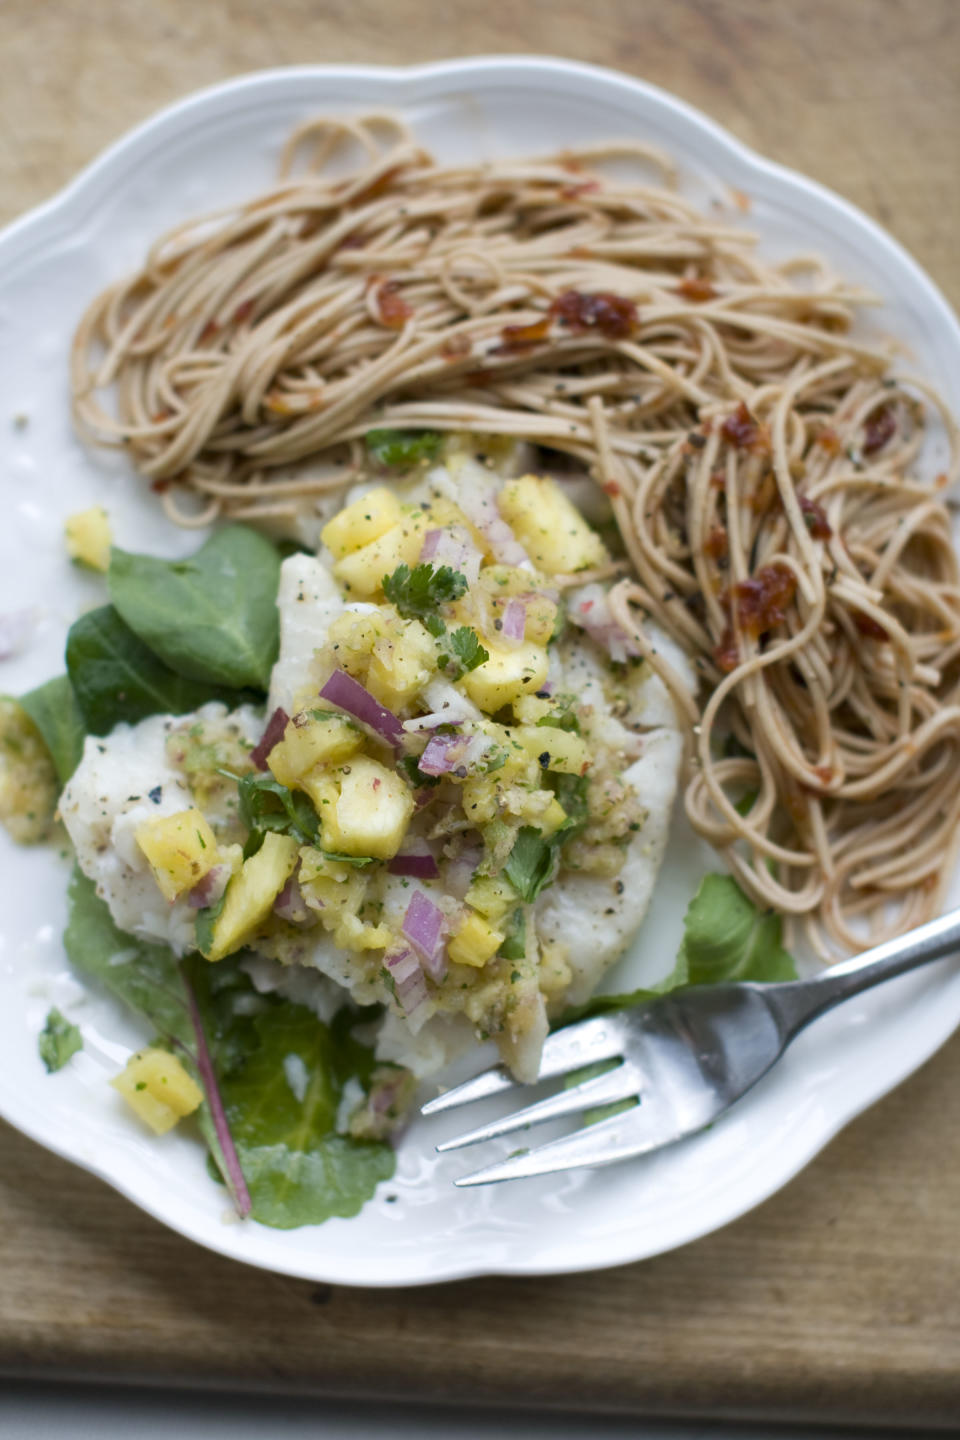 This Dec. 2, 2013 photo shows baked haddock with pineapple mint salsa in Concord, N.H. Baked white fish is a fast and healthy way to get dinner on the table. The secret to getting a good tasting baked white fish, without adding tons of fat and calories or rendering it a tasteless hunk of protein, is all in how you dress it. (AP Photo/Matthew Mead)